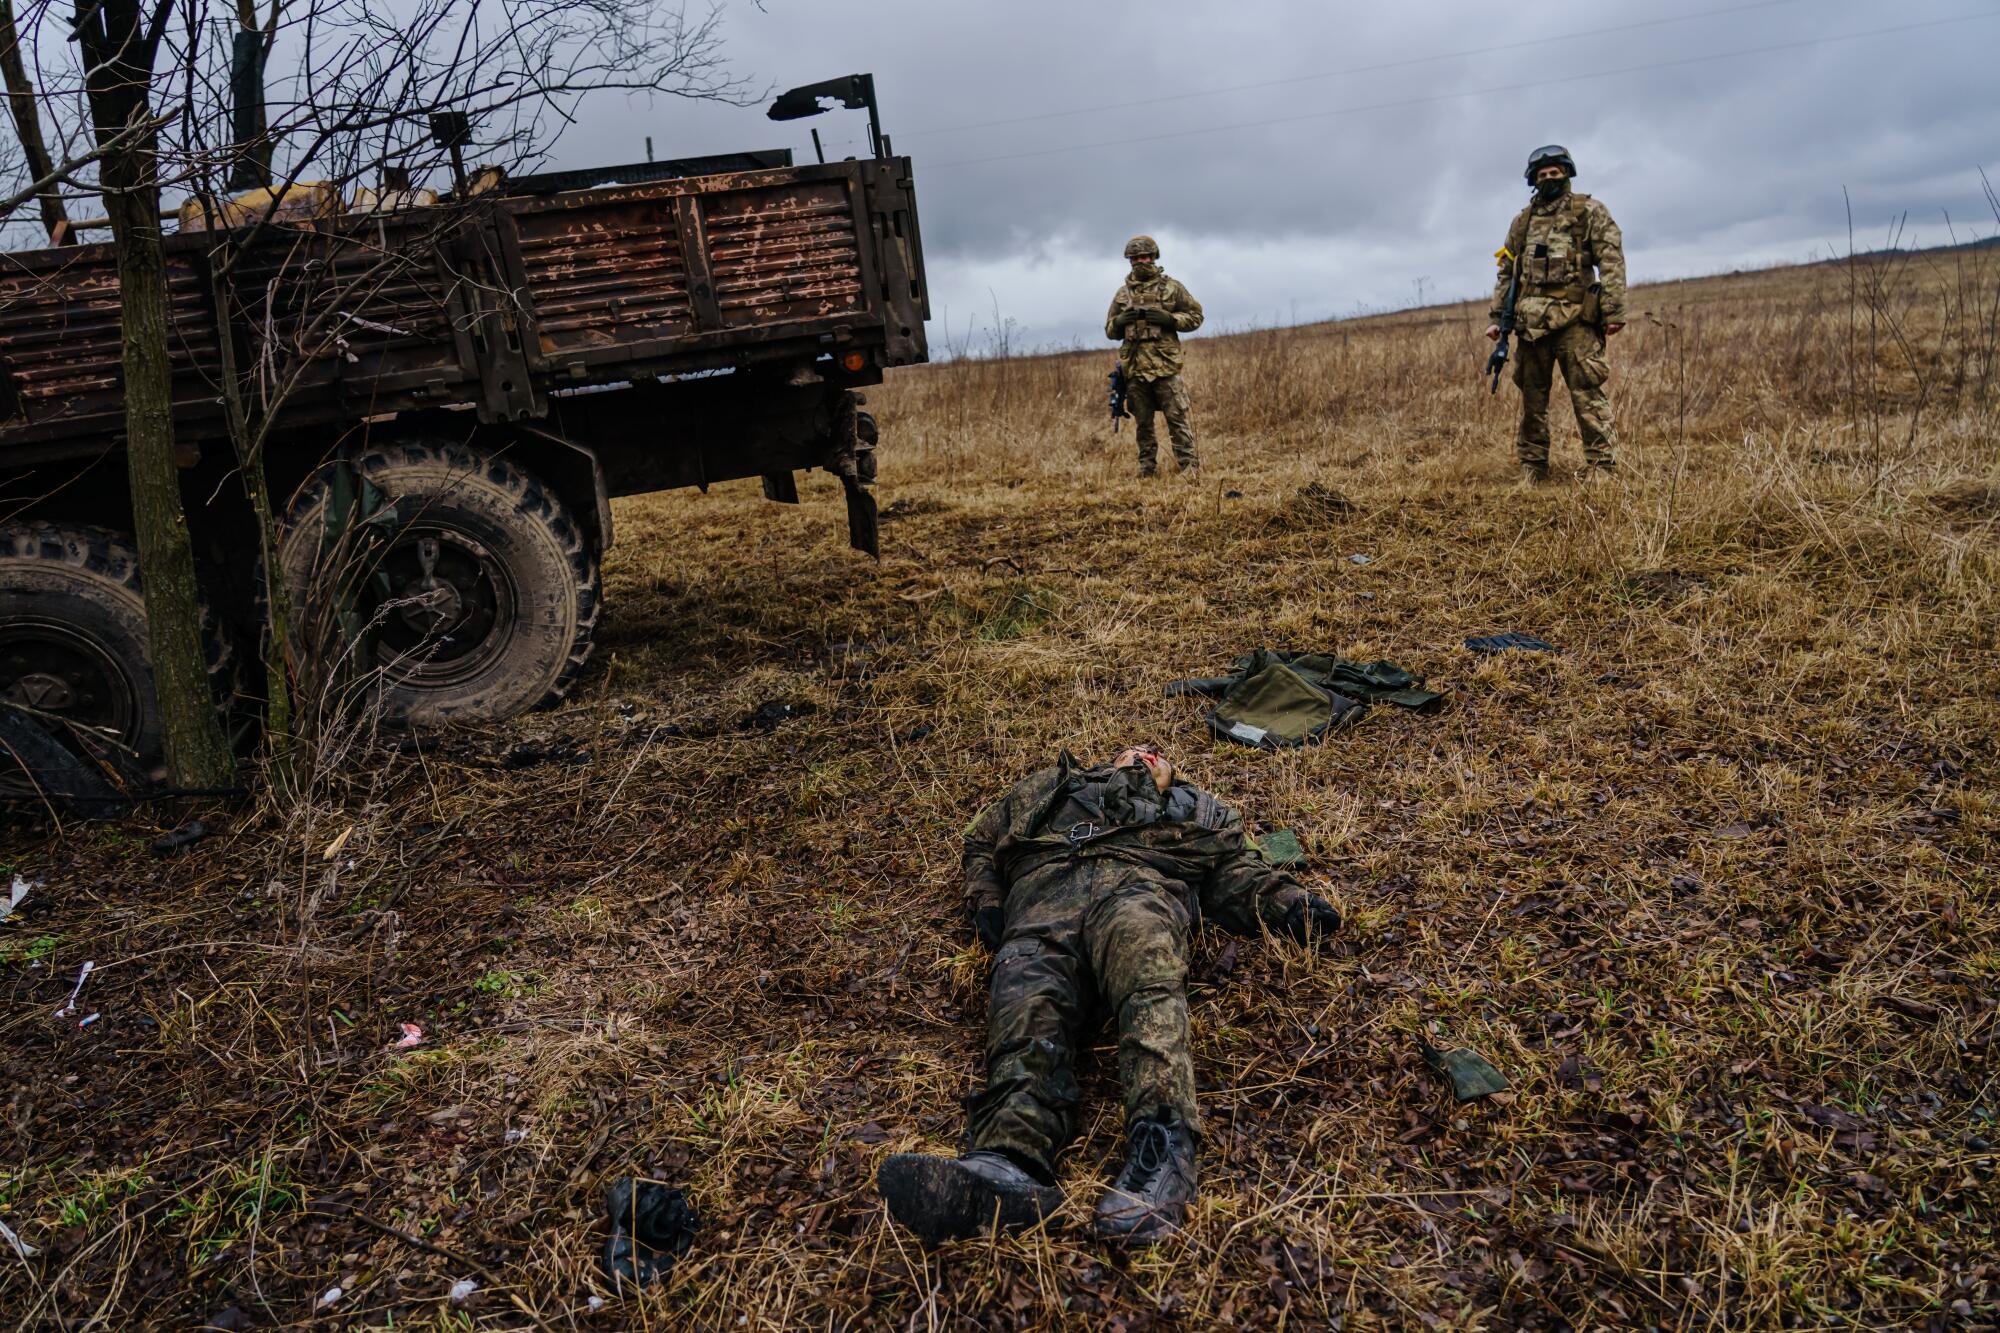 Soldiers stand near another soldier's body on the ground.